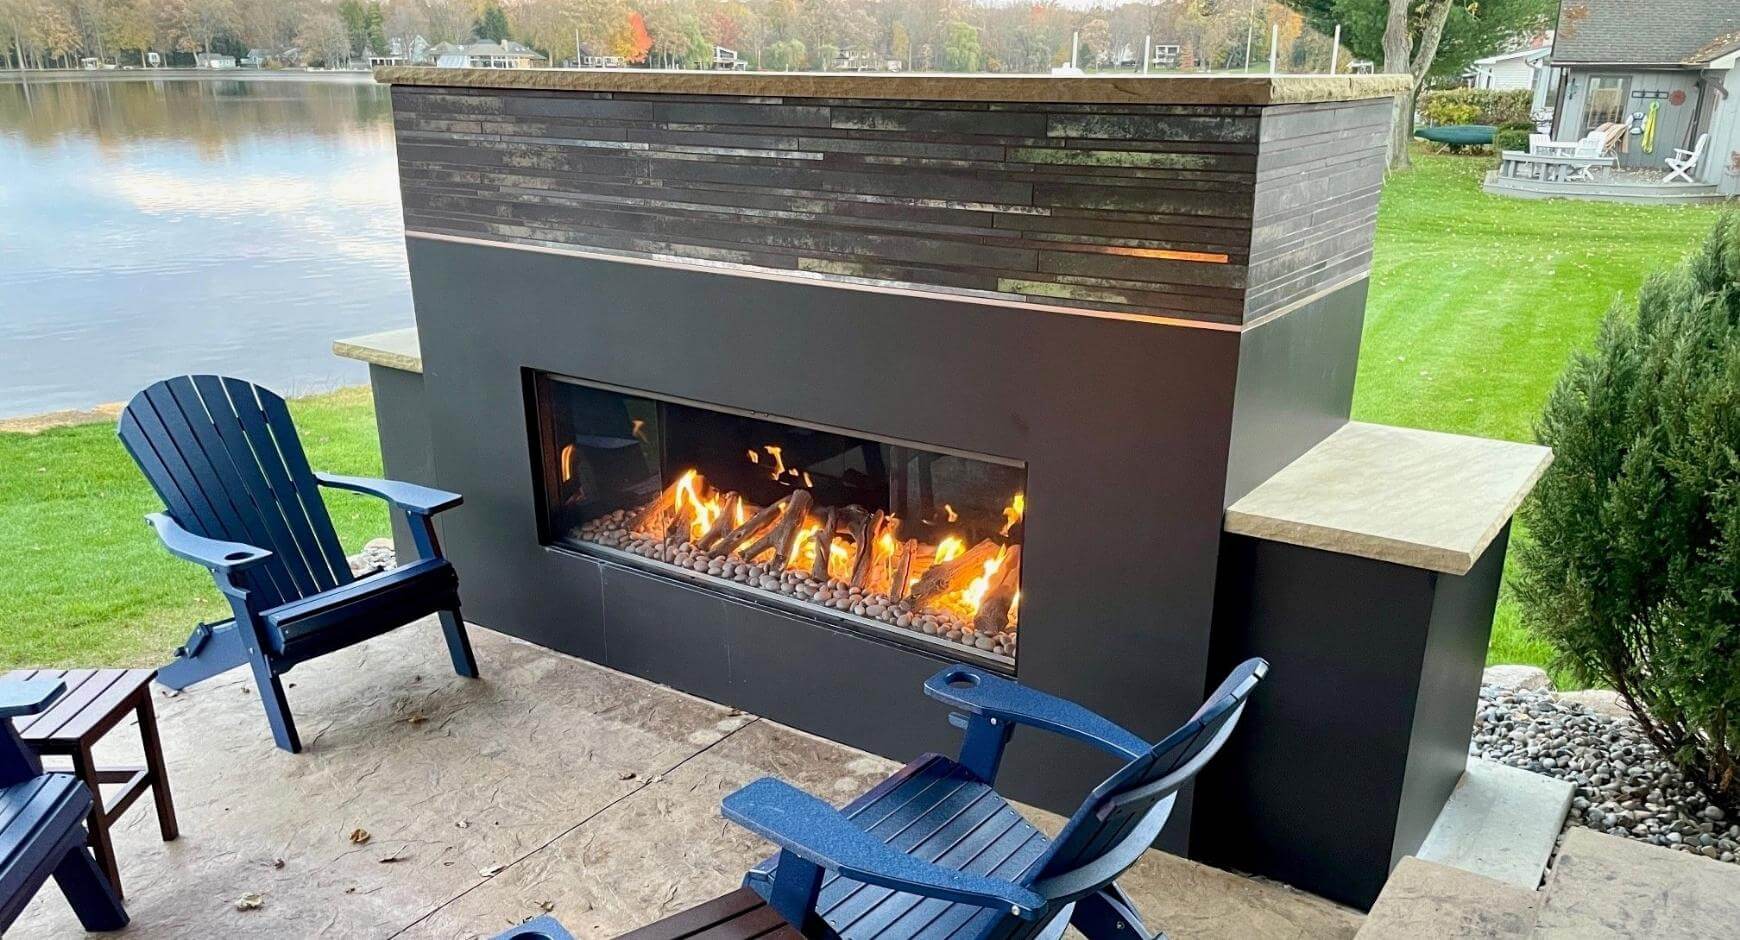 Is a fireplace in your home right for you? Image of an outdoor fireplace with chairs around it